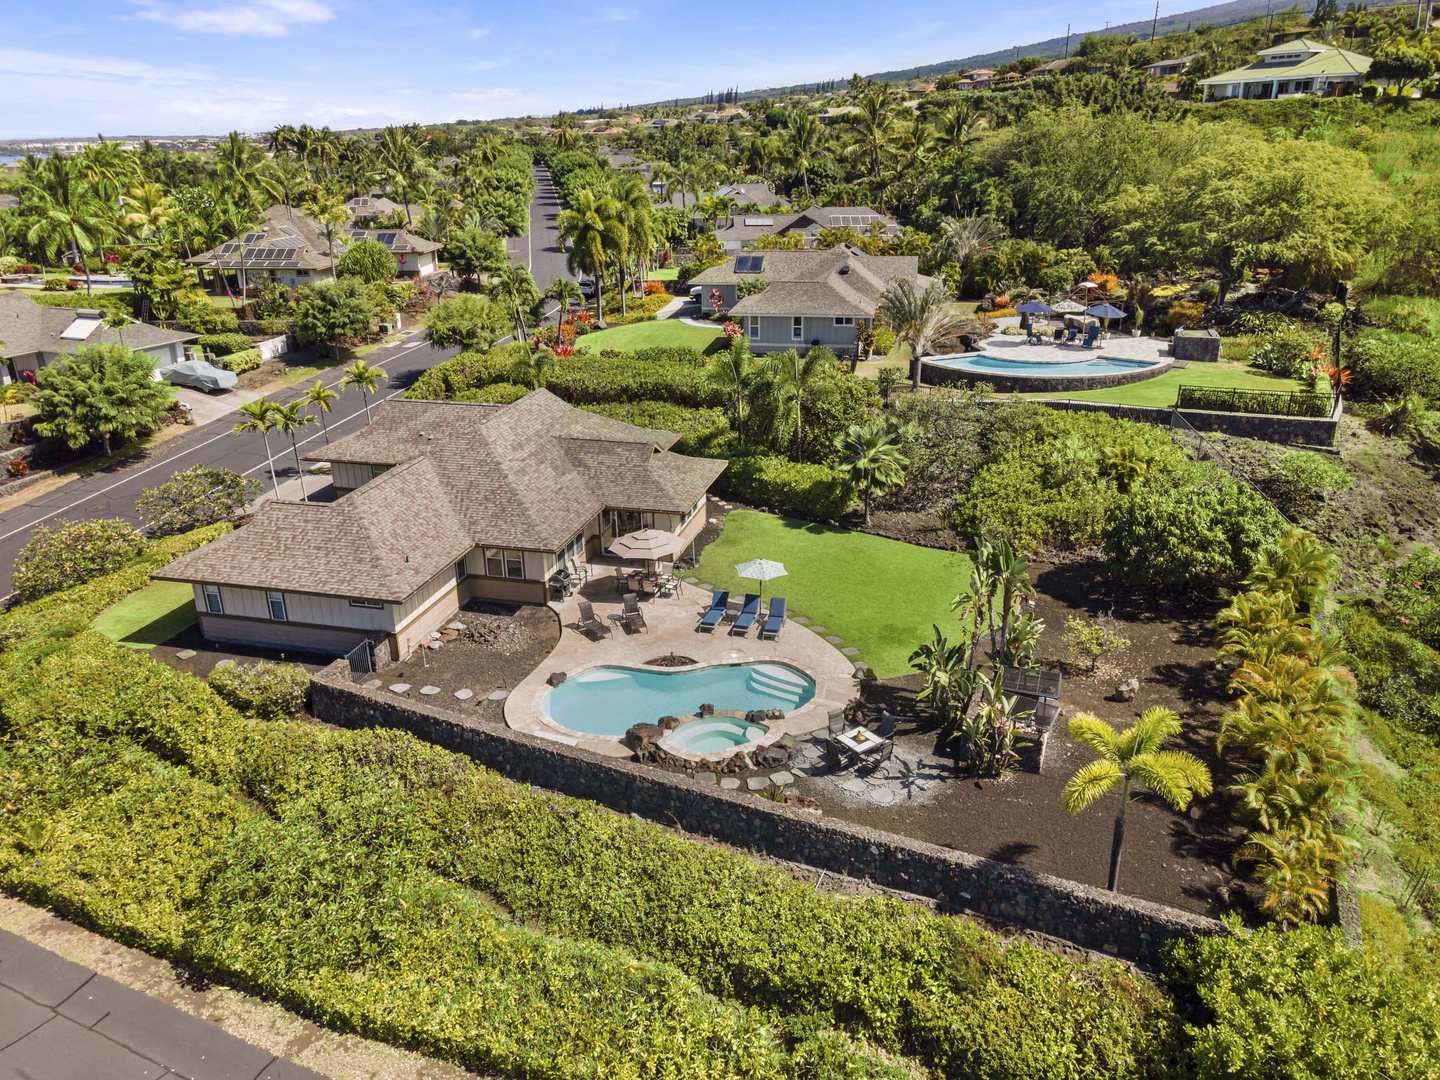 Kailua Kona Vacation Rentals, Kahakai Estates Hale - From the skies to your eyes: your dream vacation home beckons.